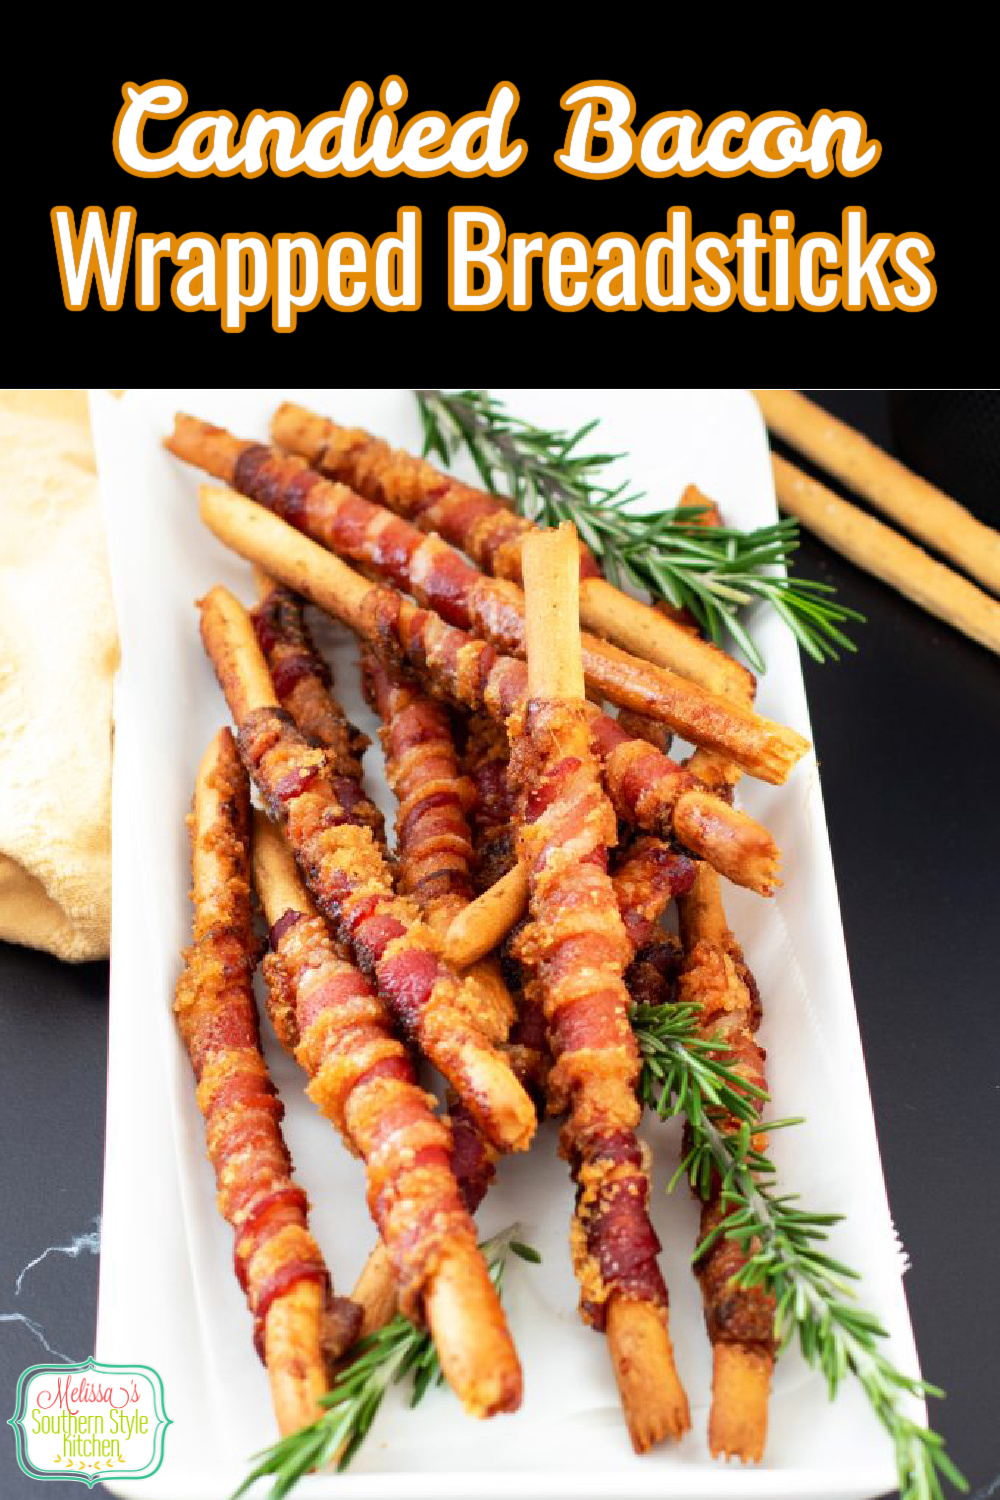 These sweet and salty Candied Bacon Breadsticks are the kind of appetizer that everyone gravitates to #bacon #candiedbacon #baconbreadsticks #appetizers #partyfood #candiedbaconbreadsticks #bread #sweet